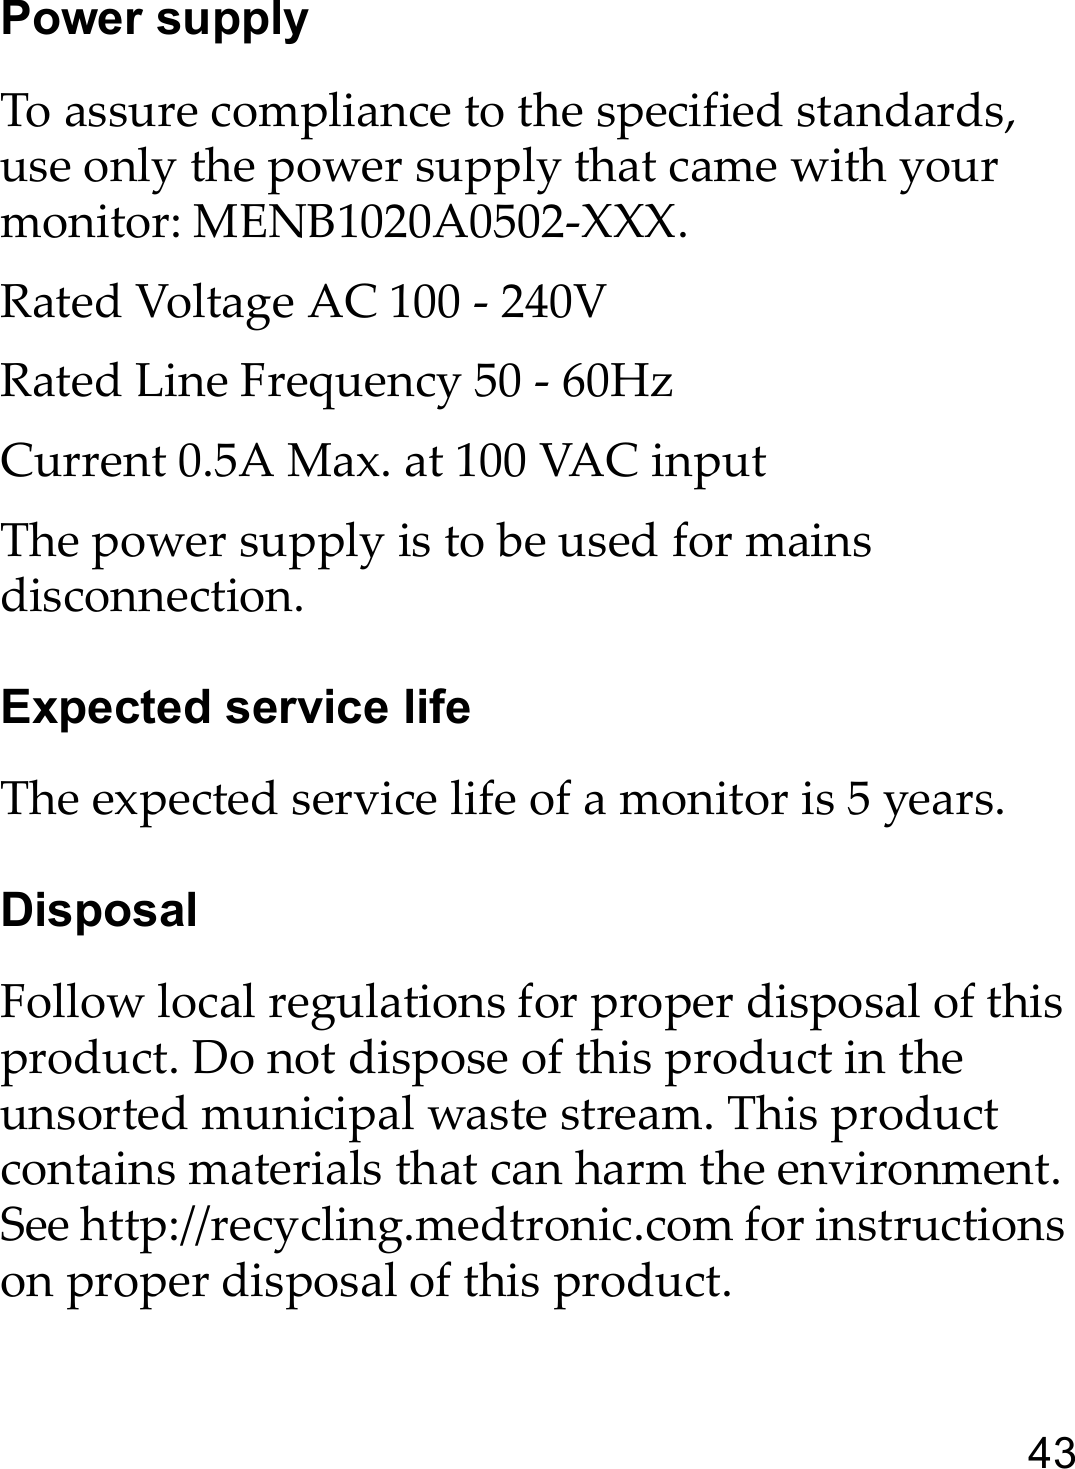 43Power supplyTo assure compliance to the specified standards, use only the power supply that came with your monitor: MENB1020A0502-XXX. Rated Voltage AC 100 - 240VRated Line Frequency 50 - 60HzCurrent 0.5A Max. at 100 VAC inputThe power supply is to be used for mains disconnection.Expected service lifeThe expected service life of a monitor is 5 years.DisposalFollow local regulations for proper disposal of this product. Do not dispose of this product in the unsorted municipal waste stream. This product contains materials that can harm the environment. See http://recycling.medtronic.com for instructions on proper disposal of this product.